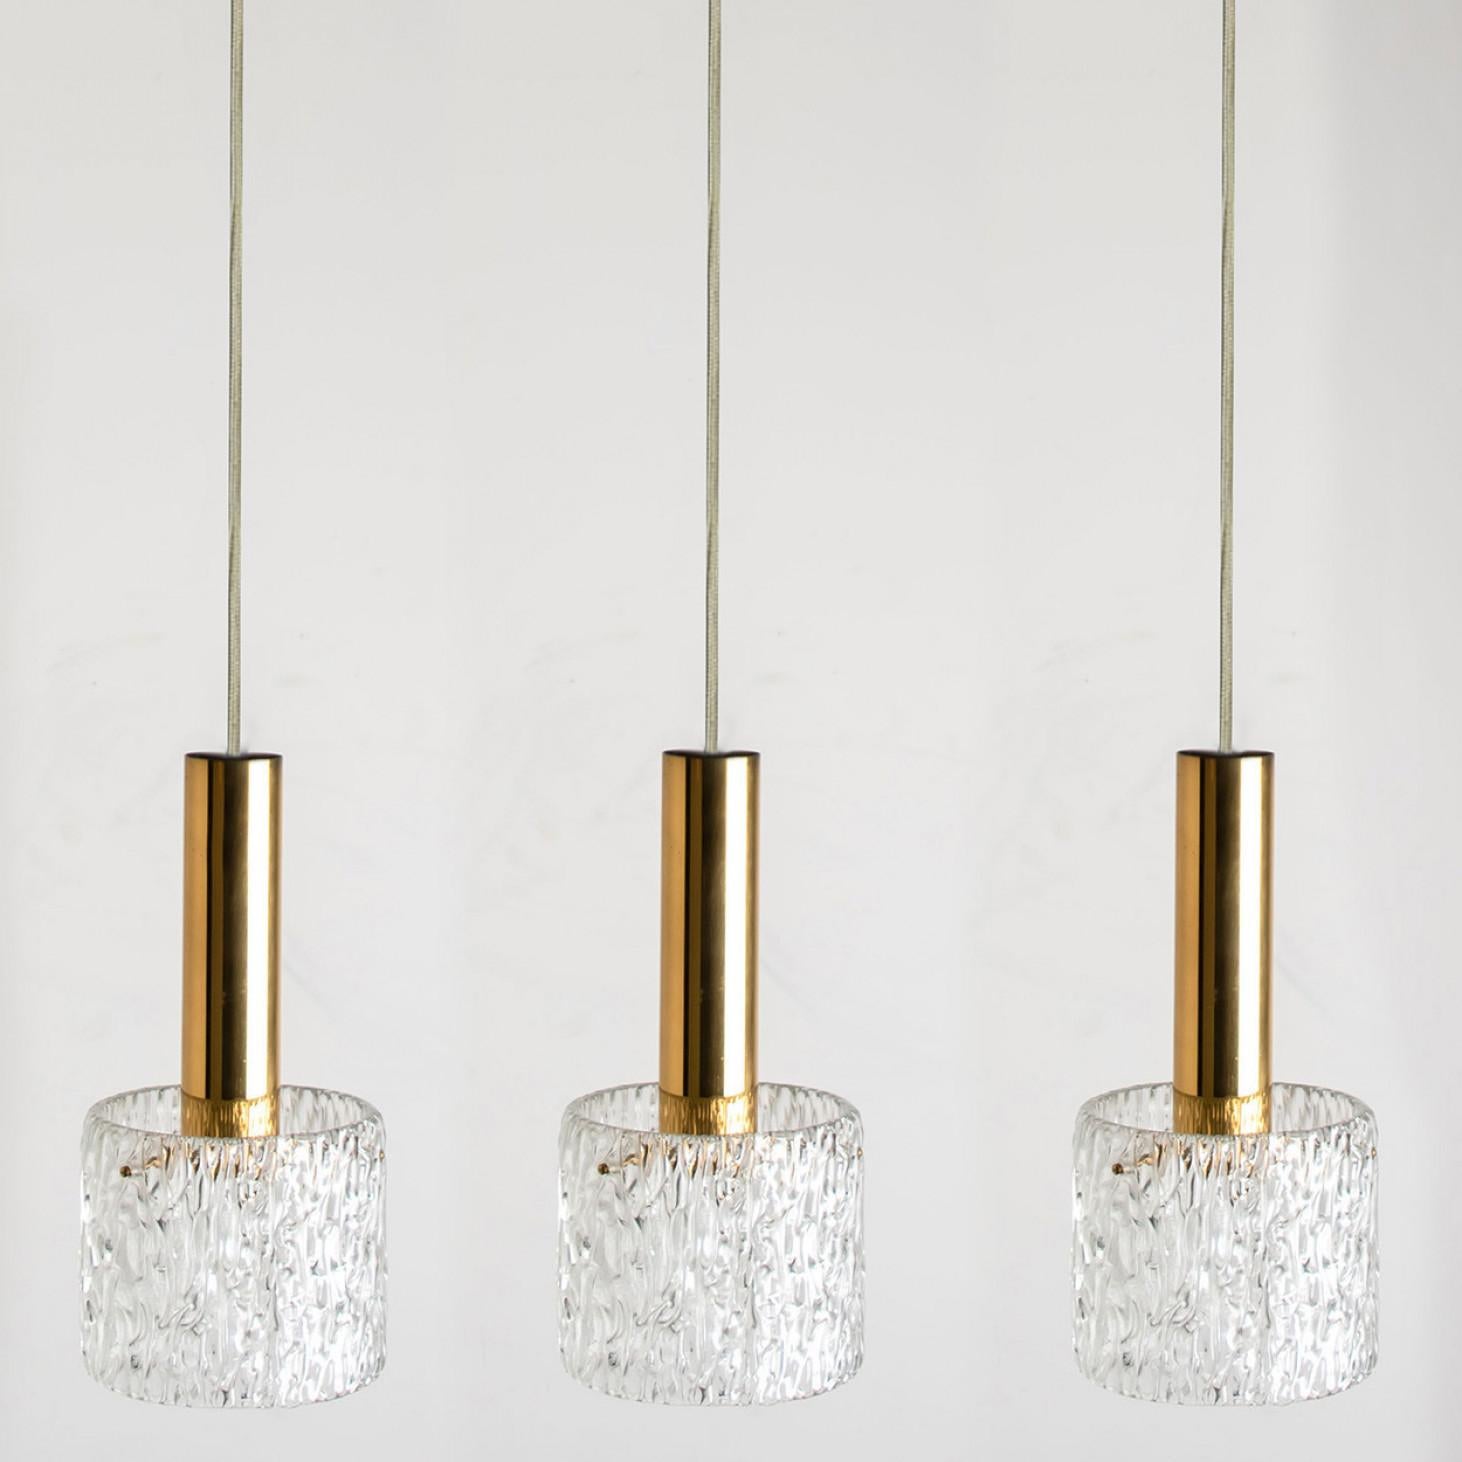 Mid-Century Modern One of Three Wave Glass Pendant Lights by J.T. Kalmar, 1960s For Sale